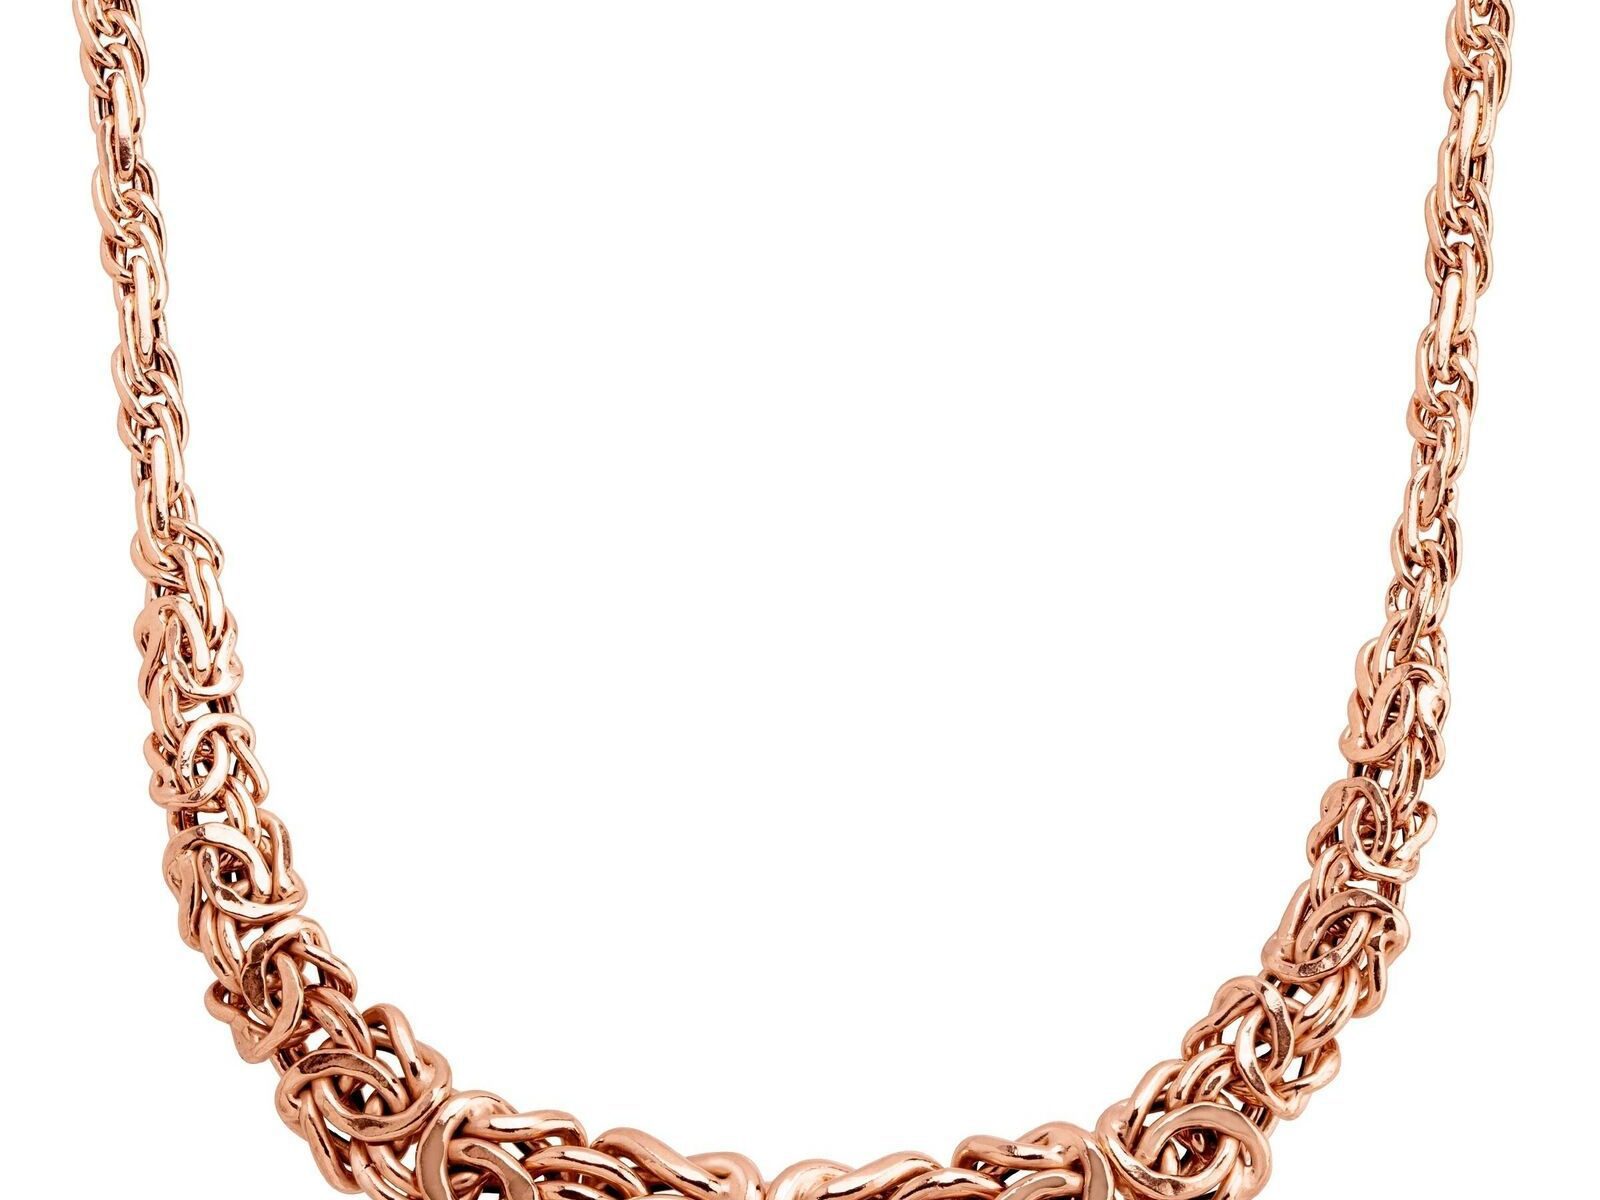 Eternity Gold Graduated Byzantine Links Necklace in 14K Gold, 17"